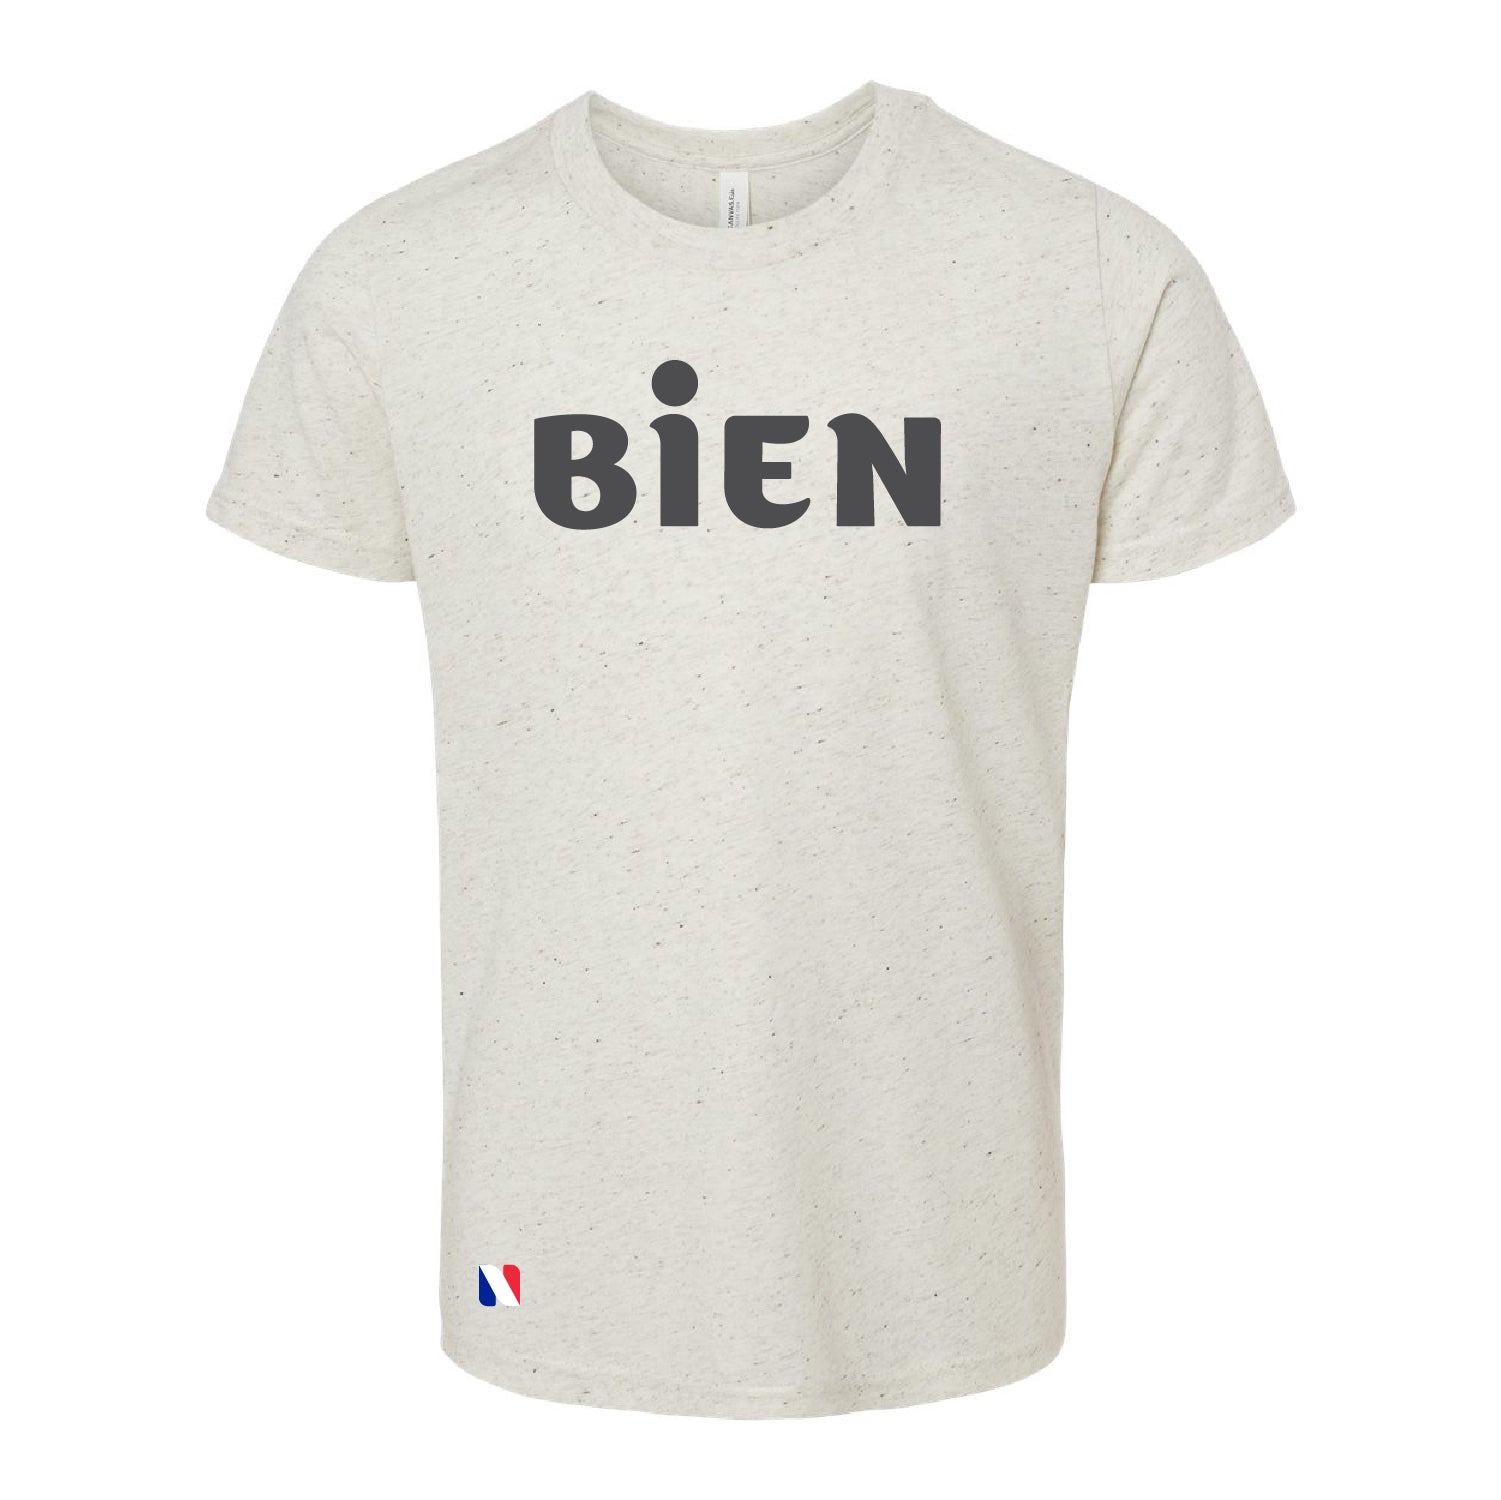 BIEN - YOUTH TRIBLEND TEE - DSP On Demand